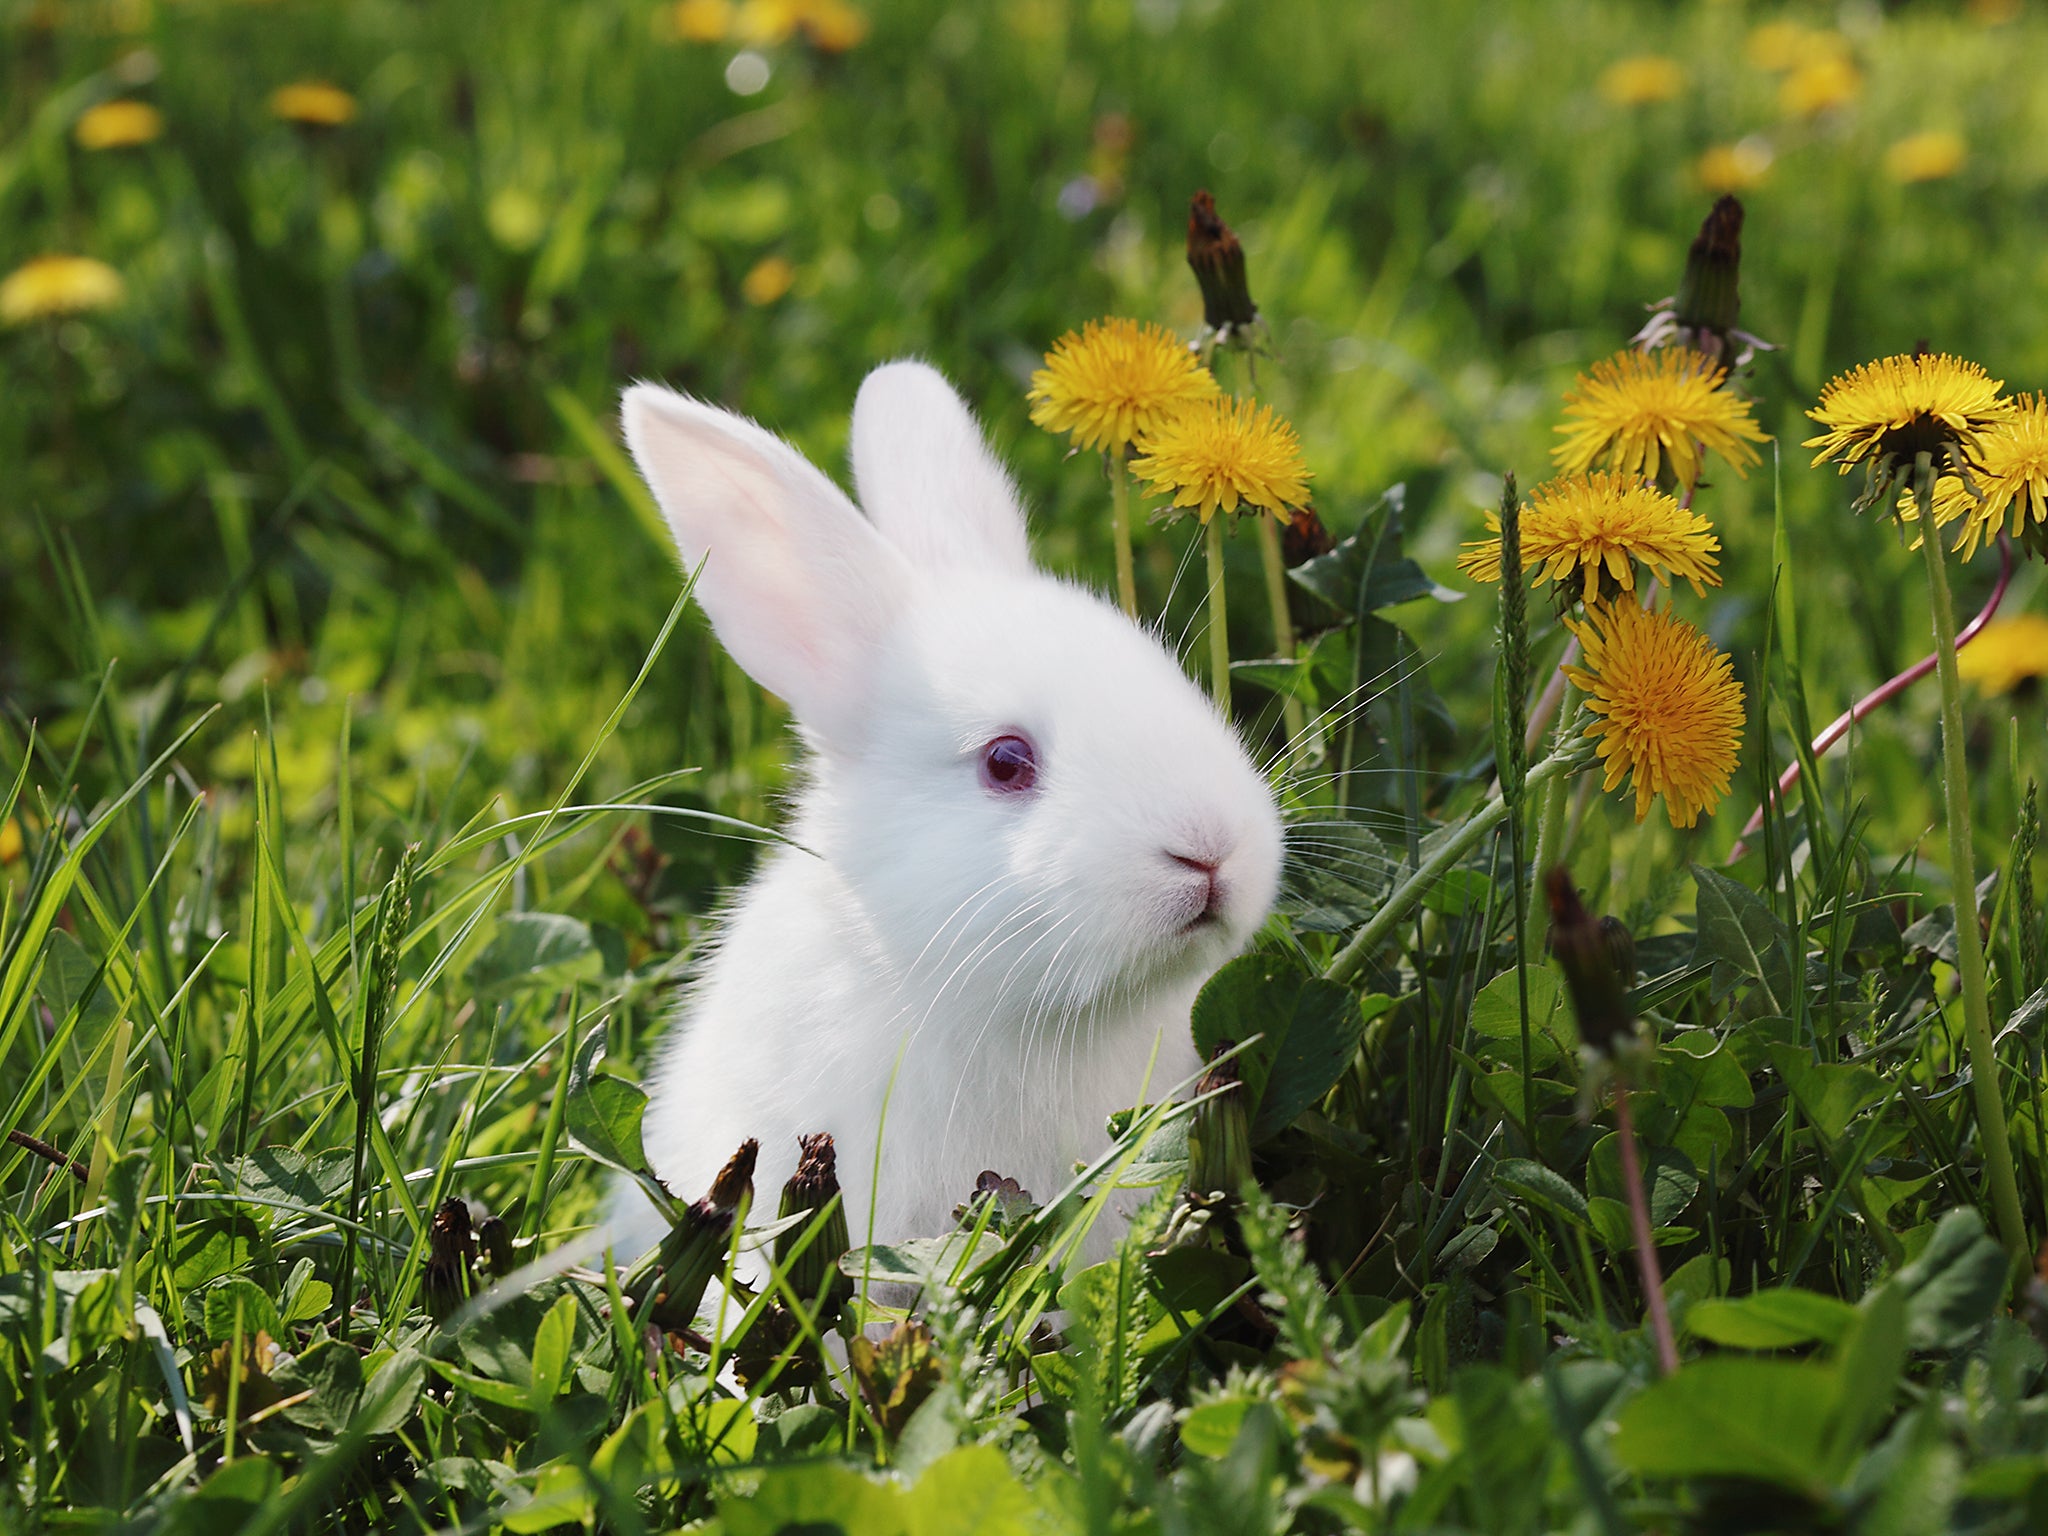 The firm will also run free ‘rabbit workshops’ over the holidays to raise awareness of how to care for the mammals